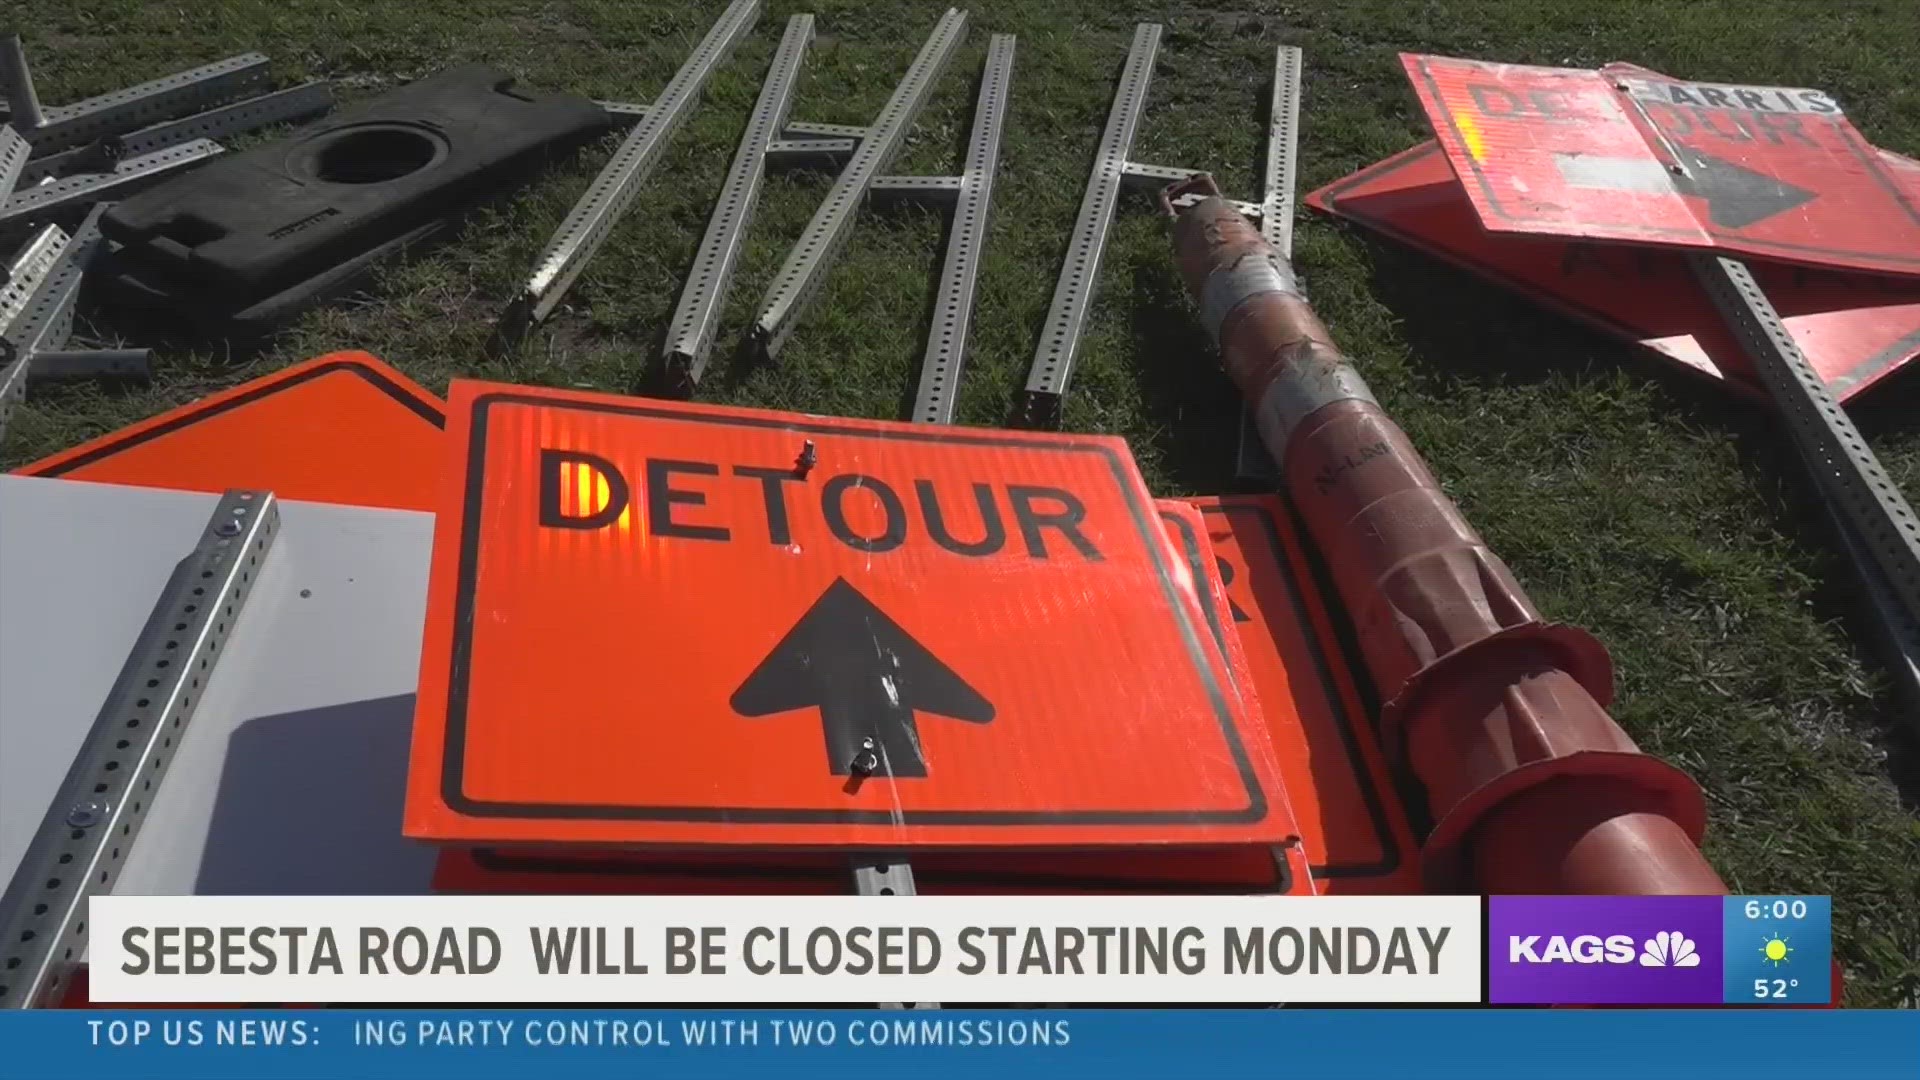 Detours will be in place for the duration of the repairs, according to the city of College Station.